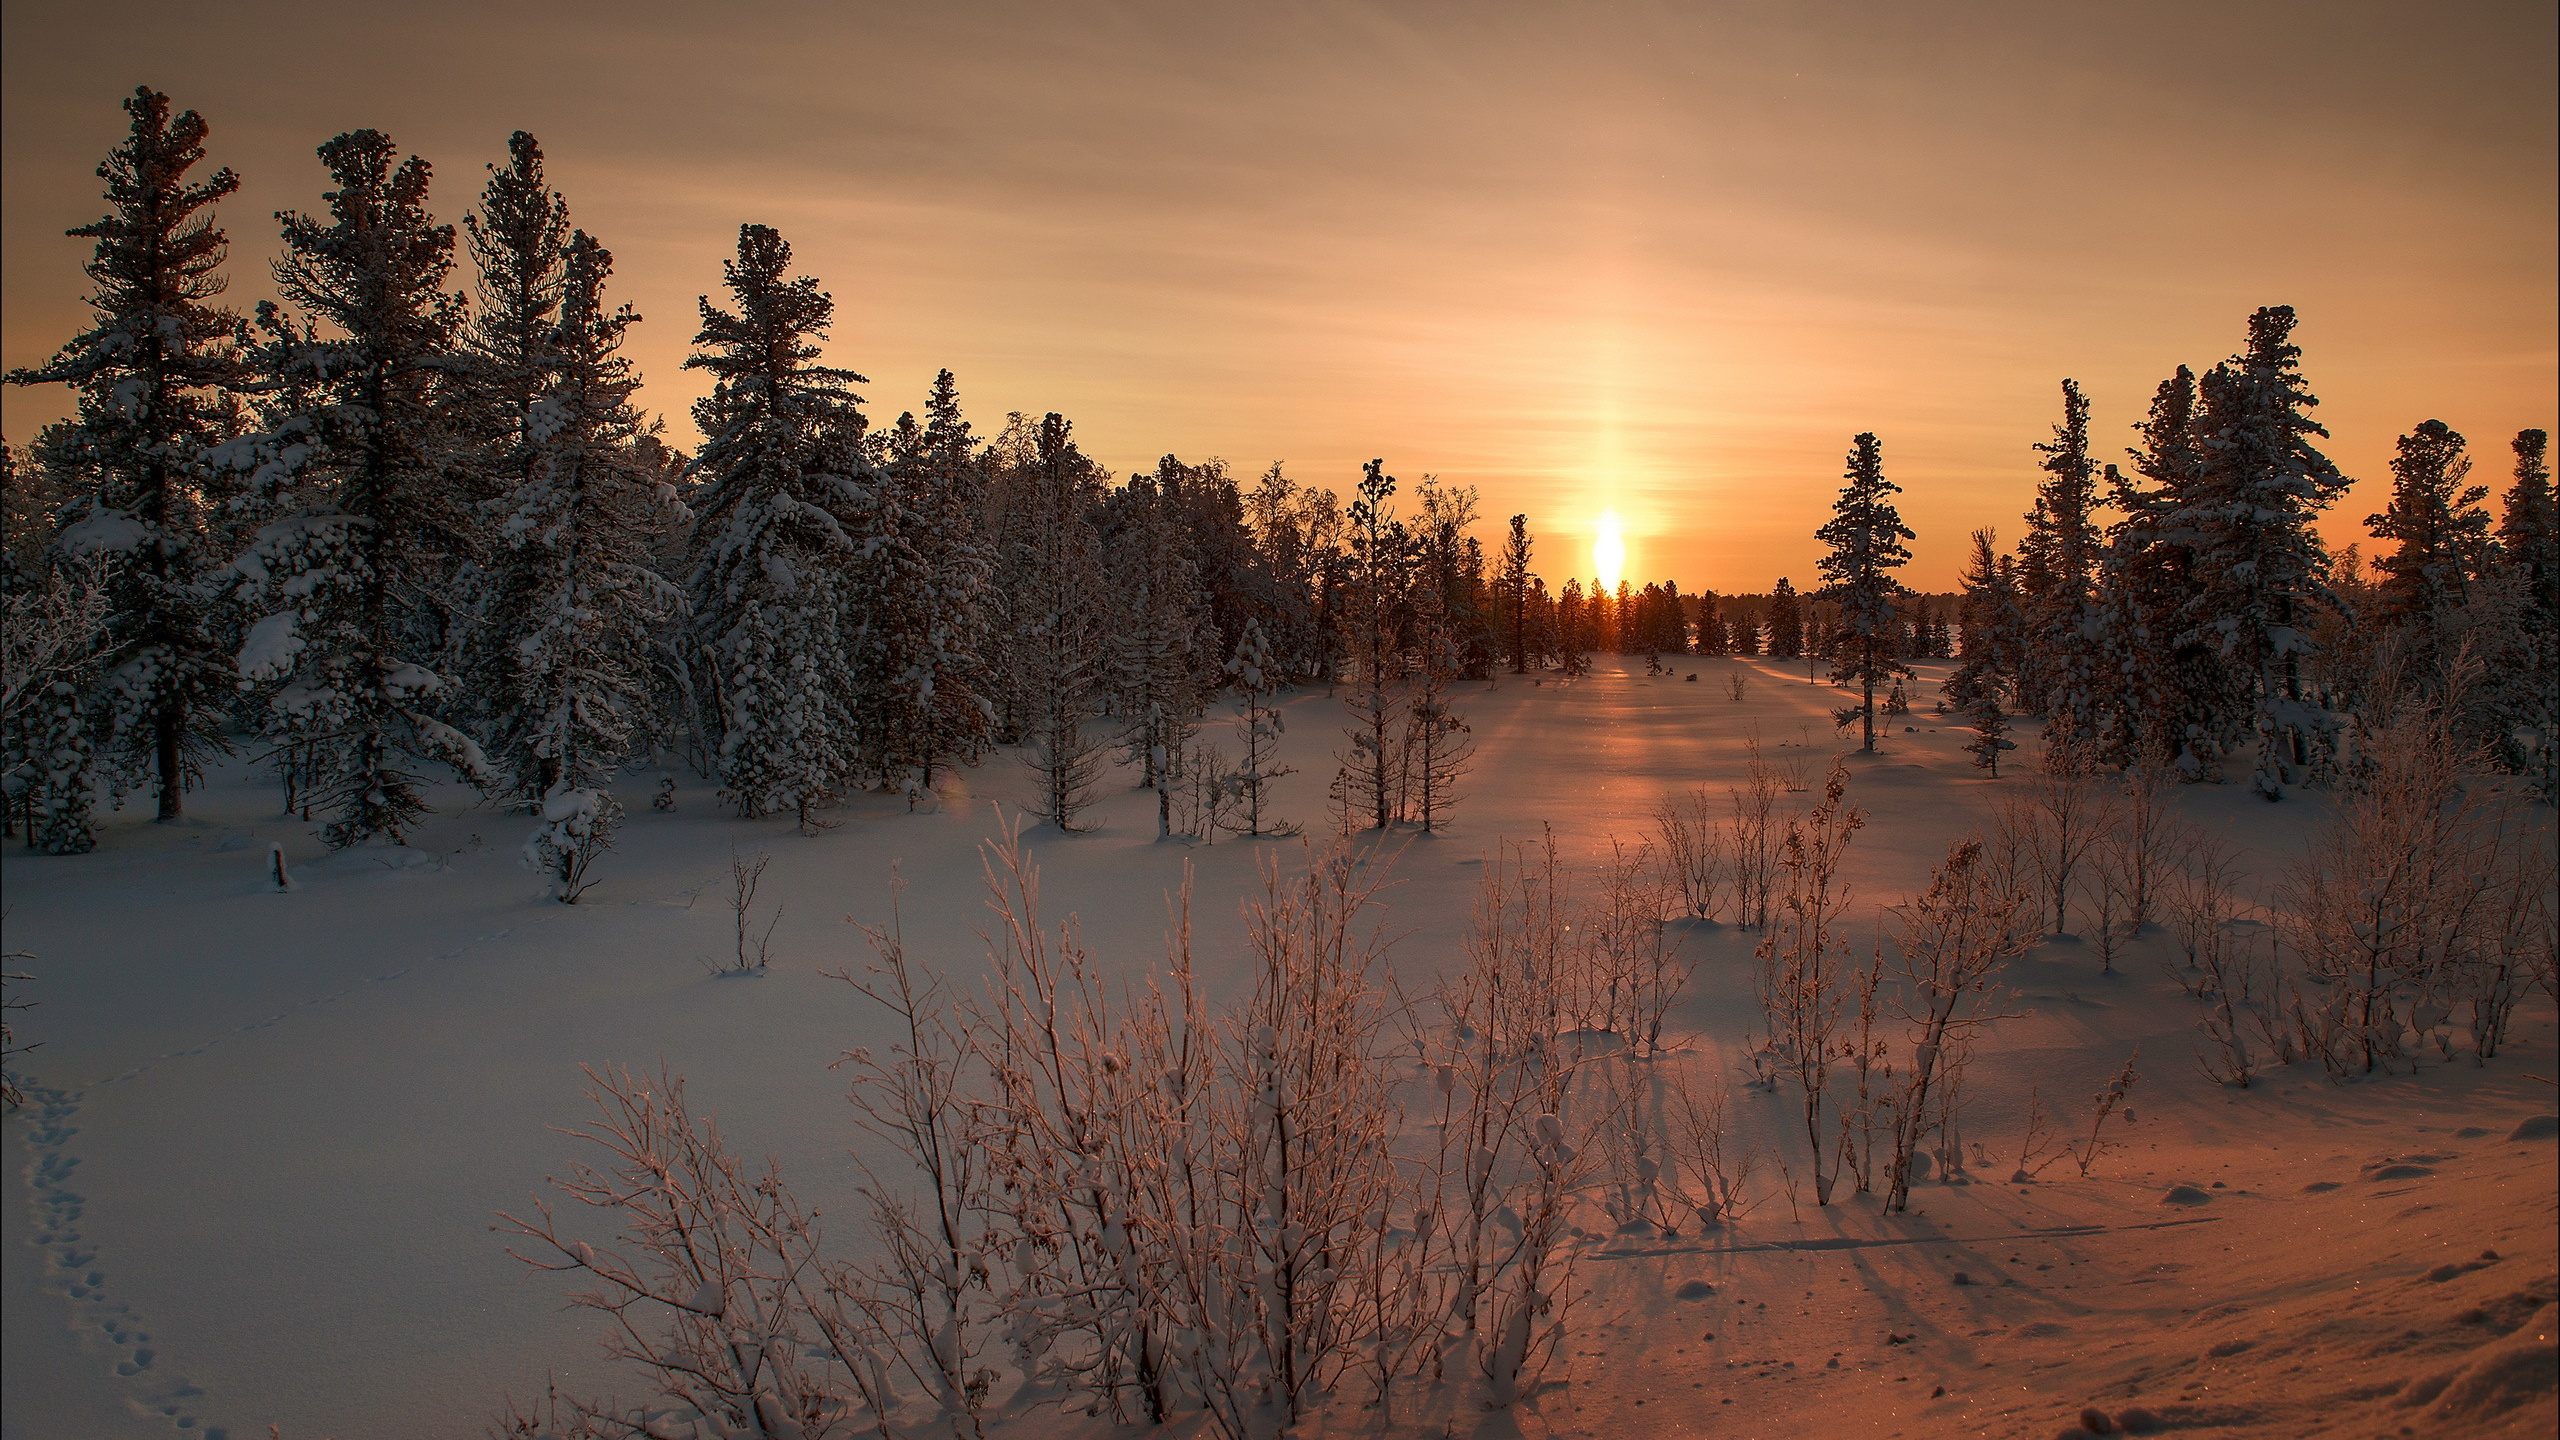 Green Trees on Snow Covered Ground During Sunset. Wallpaper in 2560x1440 Resolution